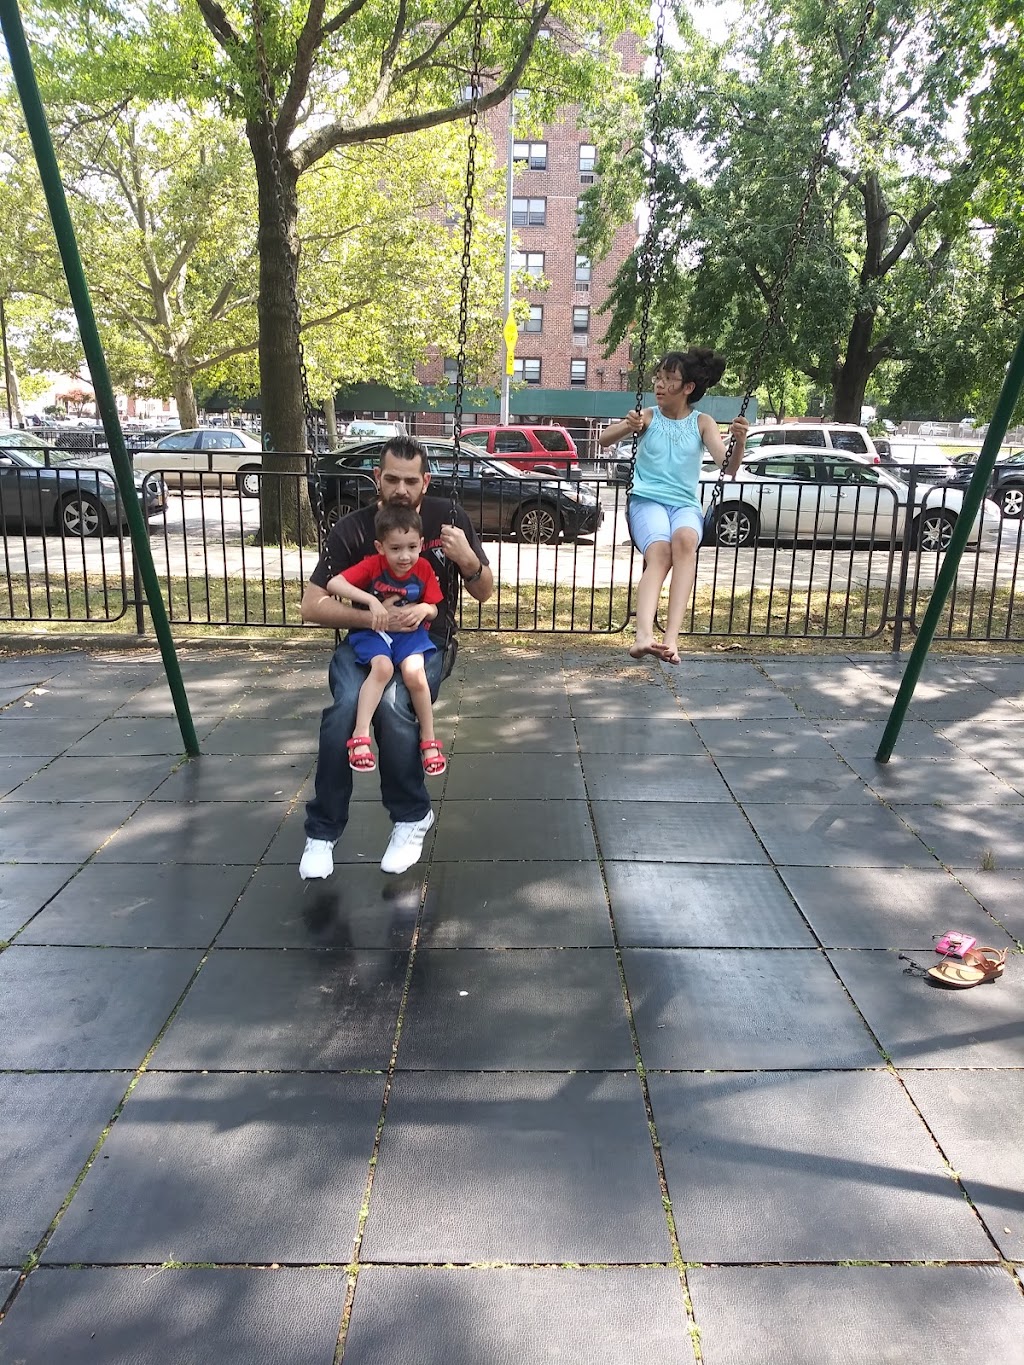 Colucci Playground | Hutchinson River Pkwy. E. bet. Wilkinson Ave. and E. 197 St, Bronx, NY 10461, USA | Phone: (212) 639-9675